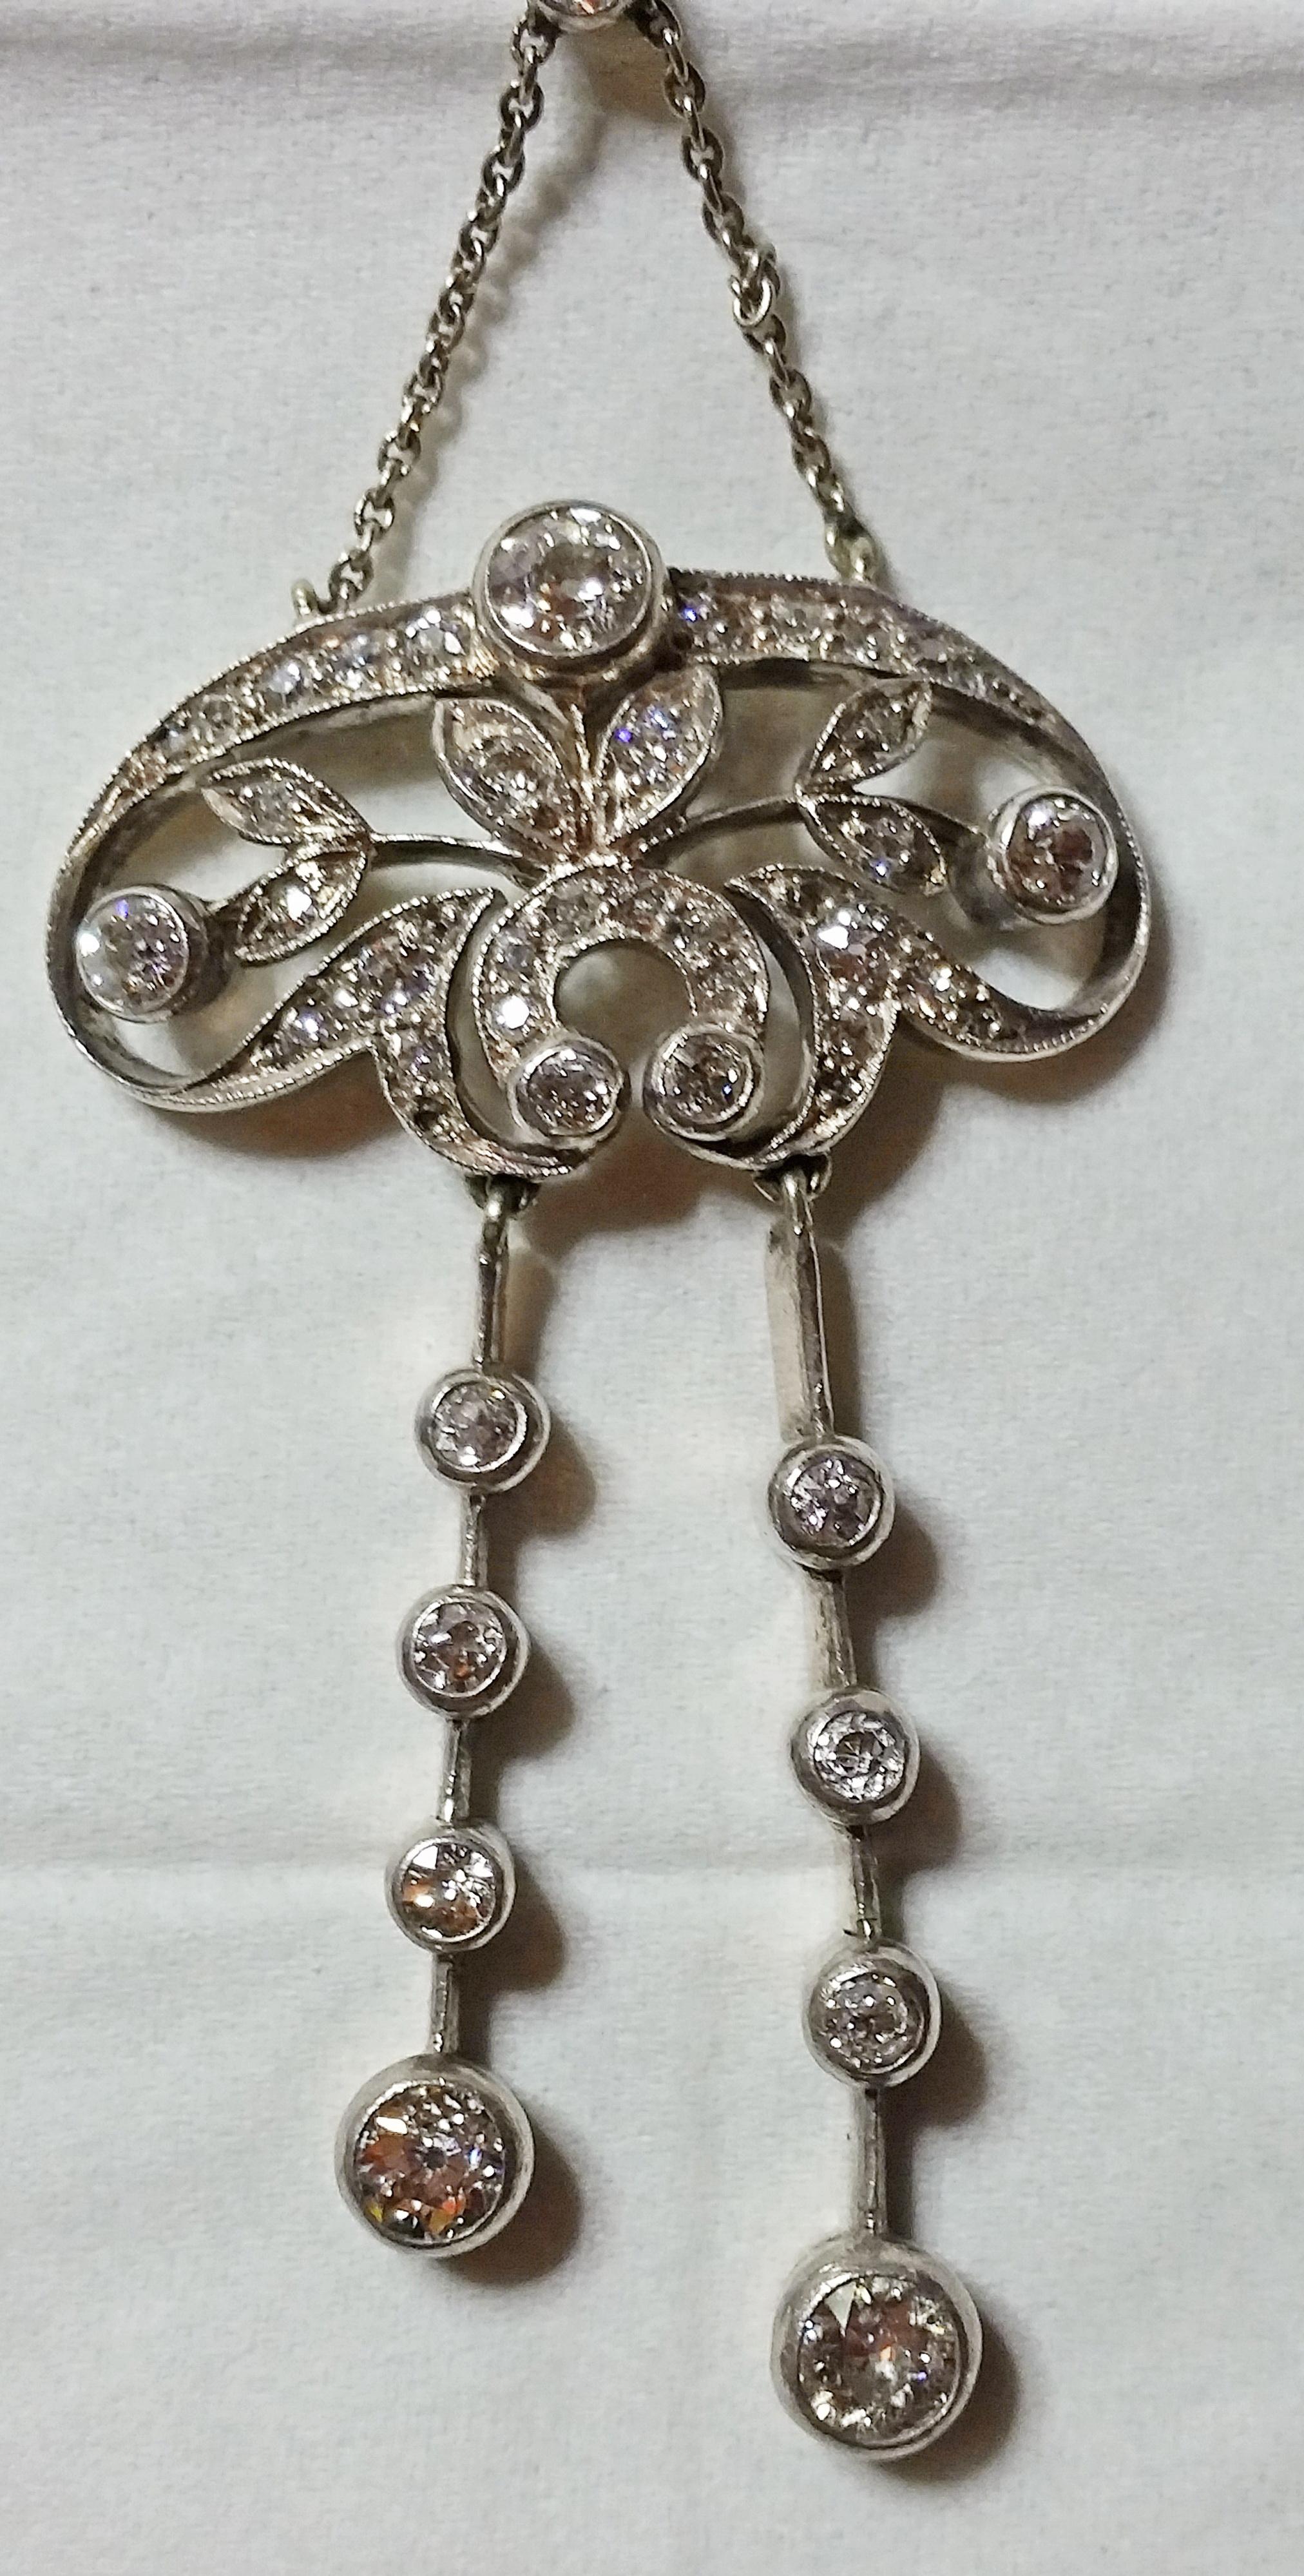 Golden Art Nouveau necklace of finest appearance, looking like stylized flower's blossoms attached to leafy stems - these ones edged by oval frame covered with diamonds.  Additionally, there are two pendants attached to frame which are decorated